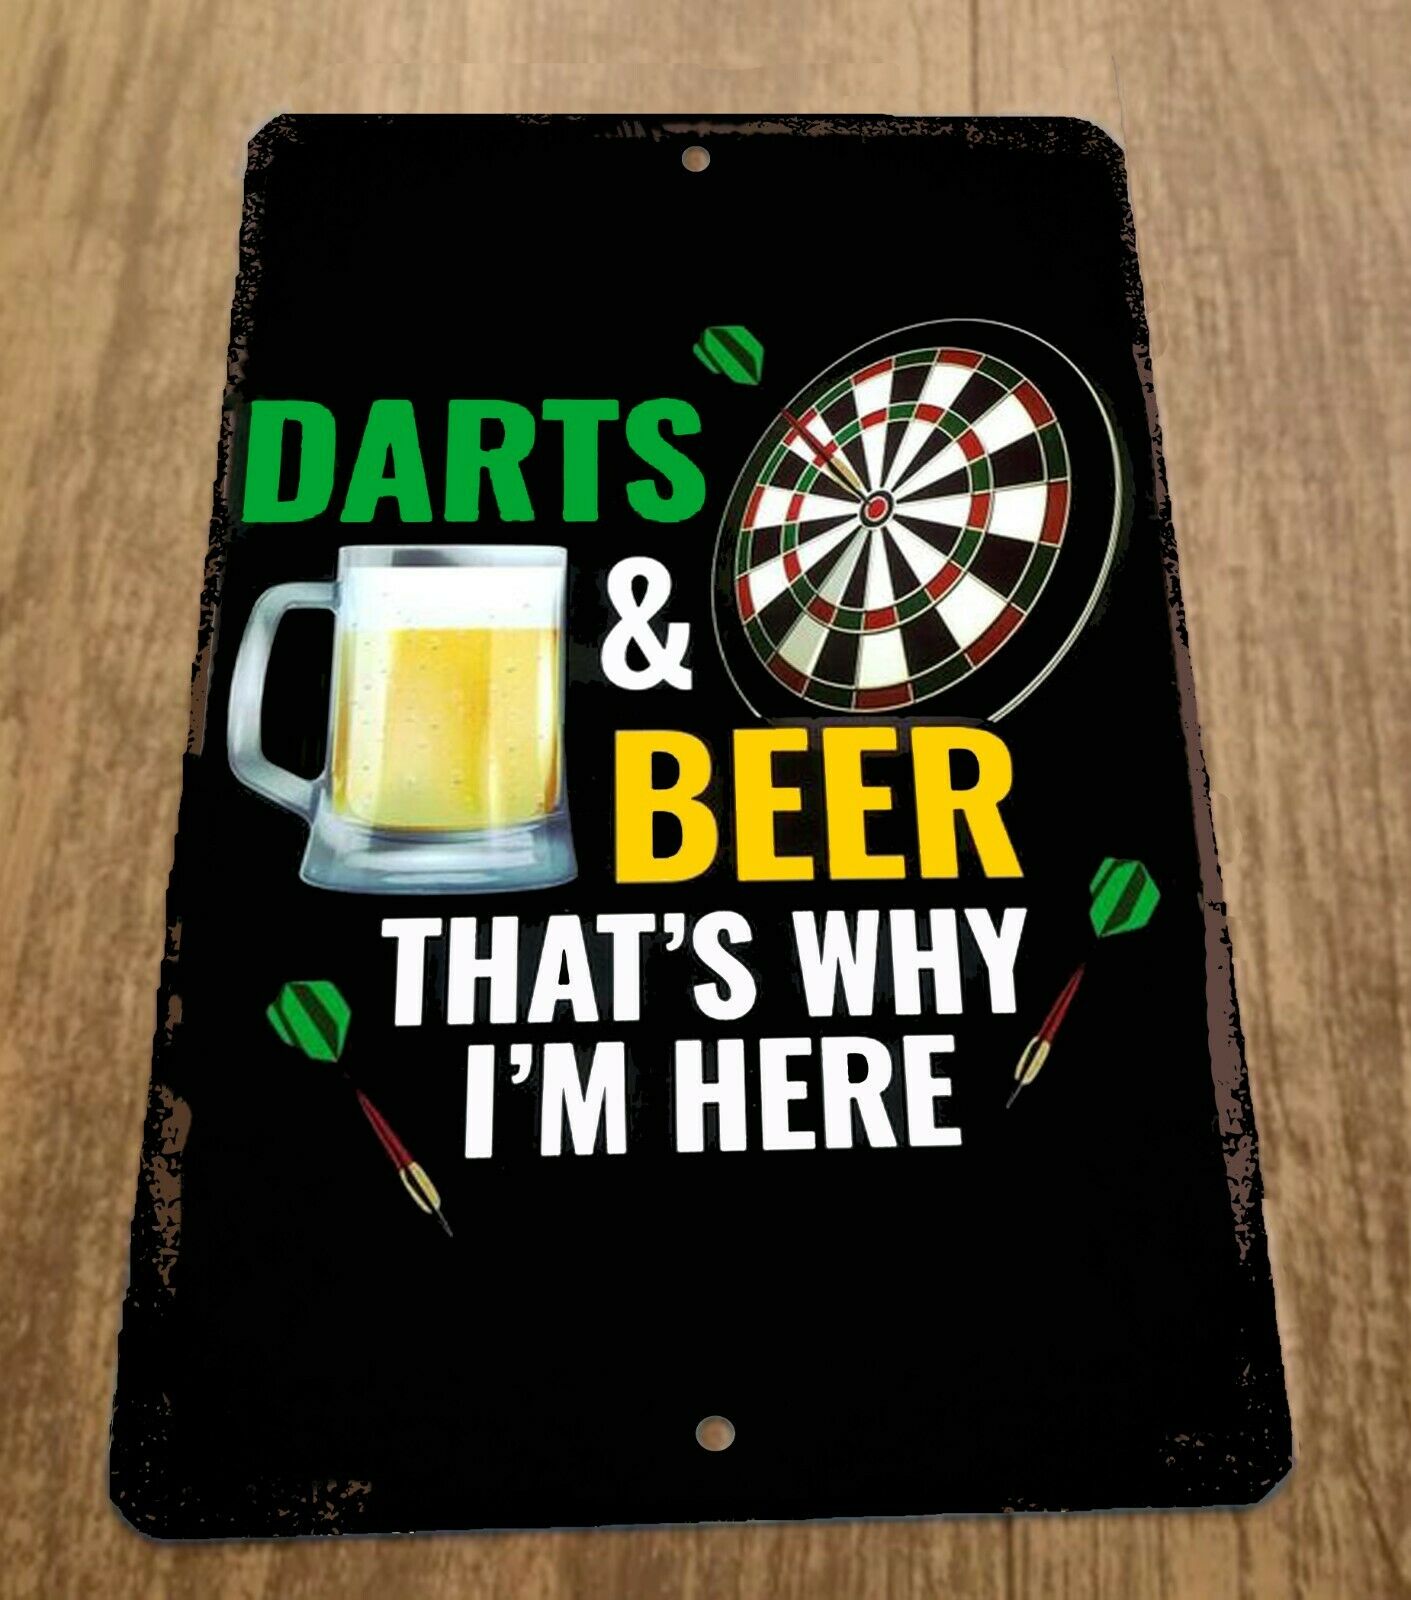 Darts and Beer Thats Why Im Here 8x12 Metal Wall Sports Bar Sign